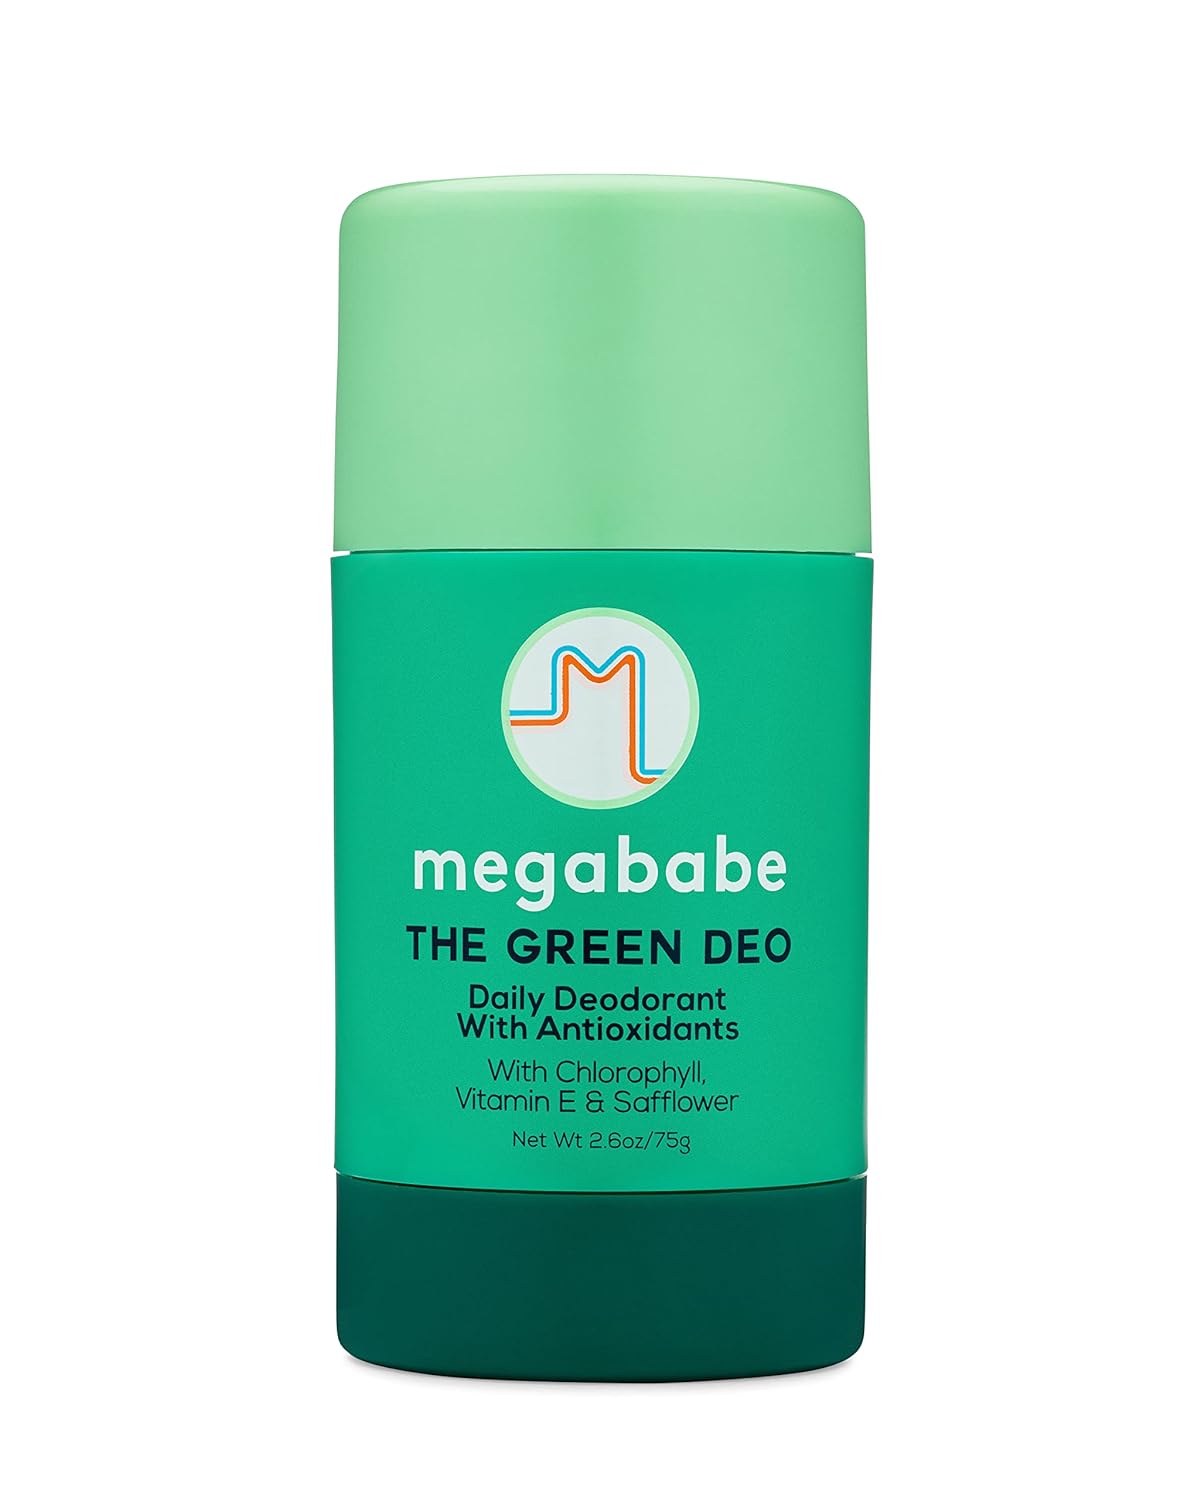 Megababe Daily Deodorant - The Green Deo…